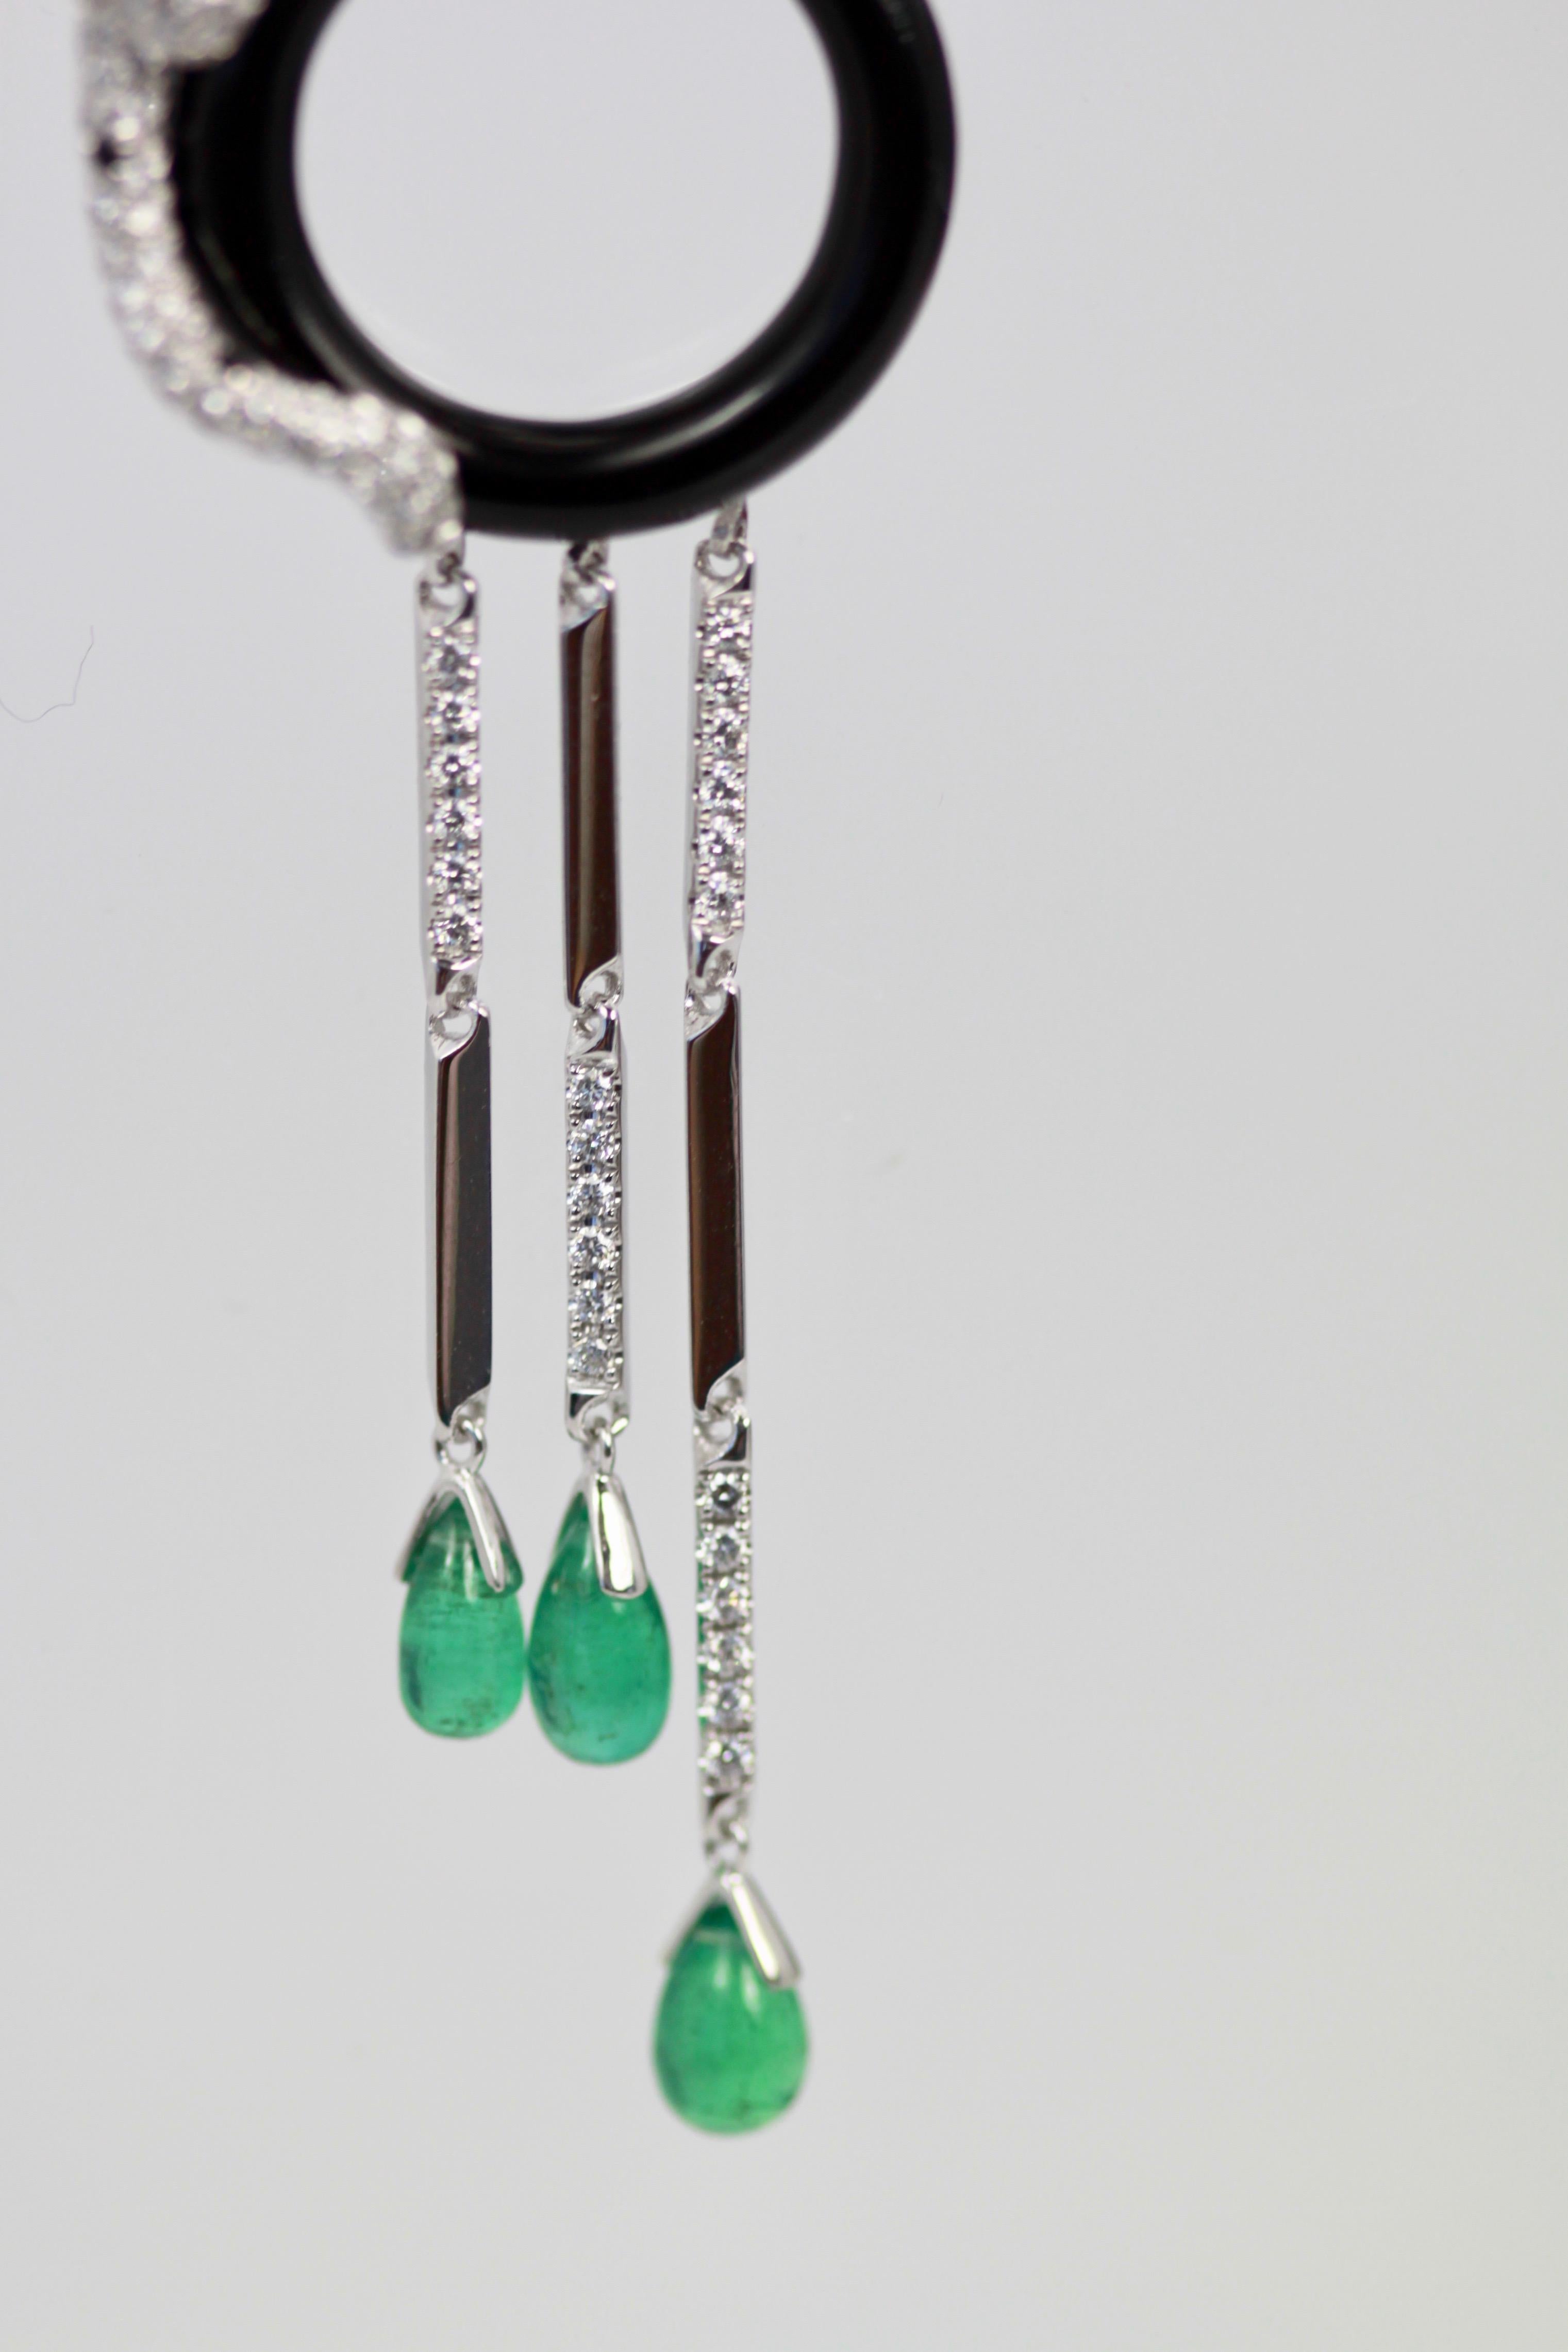 Cartier Diamond Panthere Earrings with Onyx and Emeralds 18K 2